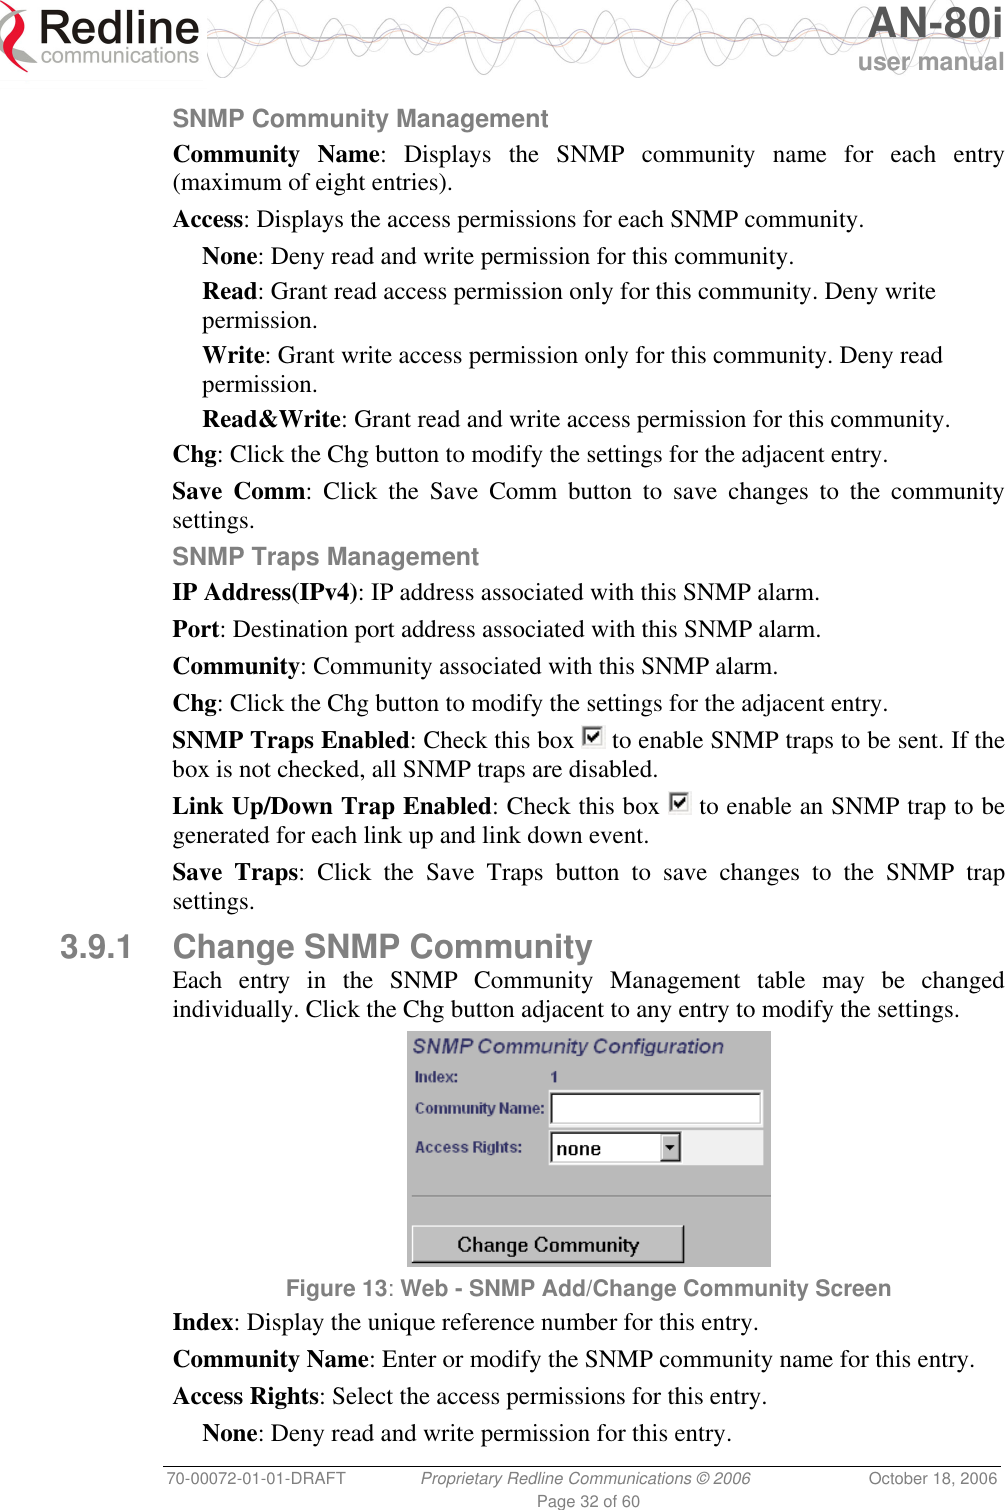   AN-80i user manual 70-00072-01-01-DRAFT  Proprietary Redline Communications © 2006  October 18, 2006 Page 32 of 60 SNMP Community Management Community Name: Displays the SNMP community name for each entry (maximum of eight entries). Access: Displays the access permissions for each SNMP community. None: Deny read and write permission for this community. Read: Grant read access permission only for this community. Deny write permission. Write: Grant write access permission only for this community. Deny read permission. Read&amp;Write: Grant read and write access permission for this community. Chg: Click the Chg button to modify the settings for the adjacent entry. Save Comm: Click the Save Comm button to save changes to the community settings. SNMP Traps Management IP Address(IPv4): IP address associated with this SNMP alarm. Port: Destination port address associated with this SNMP alarm. Community: Community associated with this SNMP alarm. Chg: Click the Chg button to modify the settings for the adjacent entry. SNMP Traps Enabled: Check this box   to enable SNMP traps to be sent. If the box is not checked, all SNMP traps are disabled. Link Up/Down Trap Enabled: Check this box   to enable an SNMP trap to be generated for each link up and link down event. Save Traps: Click the Save Traps button to save changes to the SNMP trap settings. 3.9.1  Change SNMP Community Each entry in the SNMP Community Management table may be changed individually. Click the Chg button adjacent to any entry to modify the settings.  Figure 13: Web - SNMP Add/Change Community Screen  Index: Display the unique reference number for this entry. Community Name: Enter or modify the SNMP community name for this entry. Access Rights: Select the access permissions for this entry. None: Deny read and write permission for this entry. 